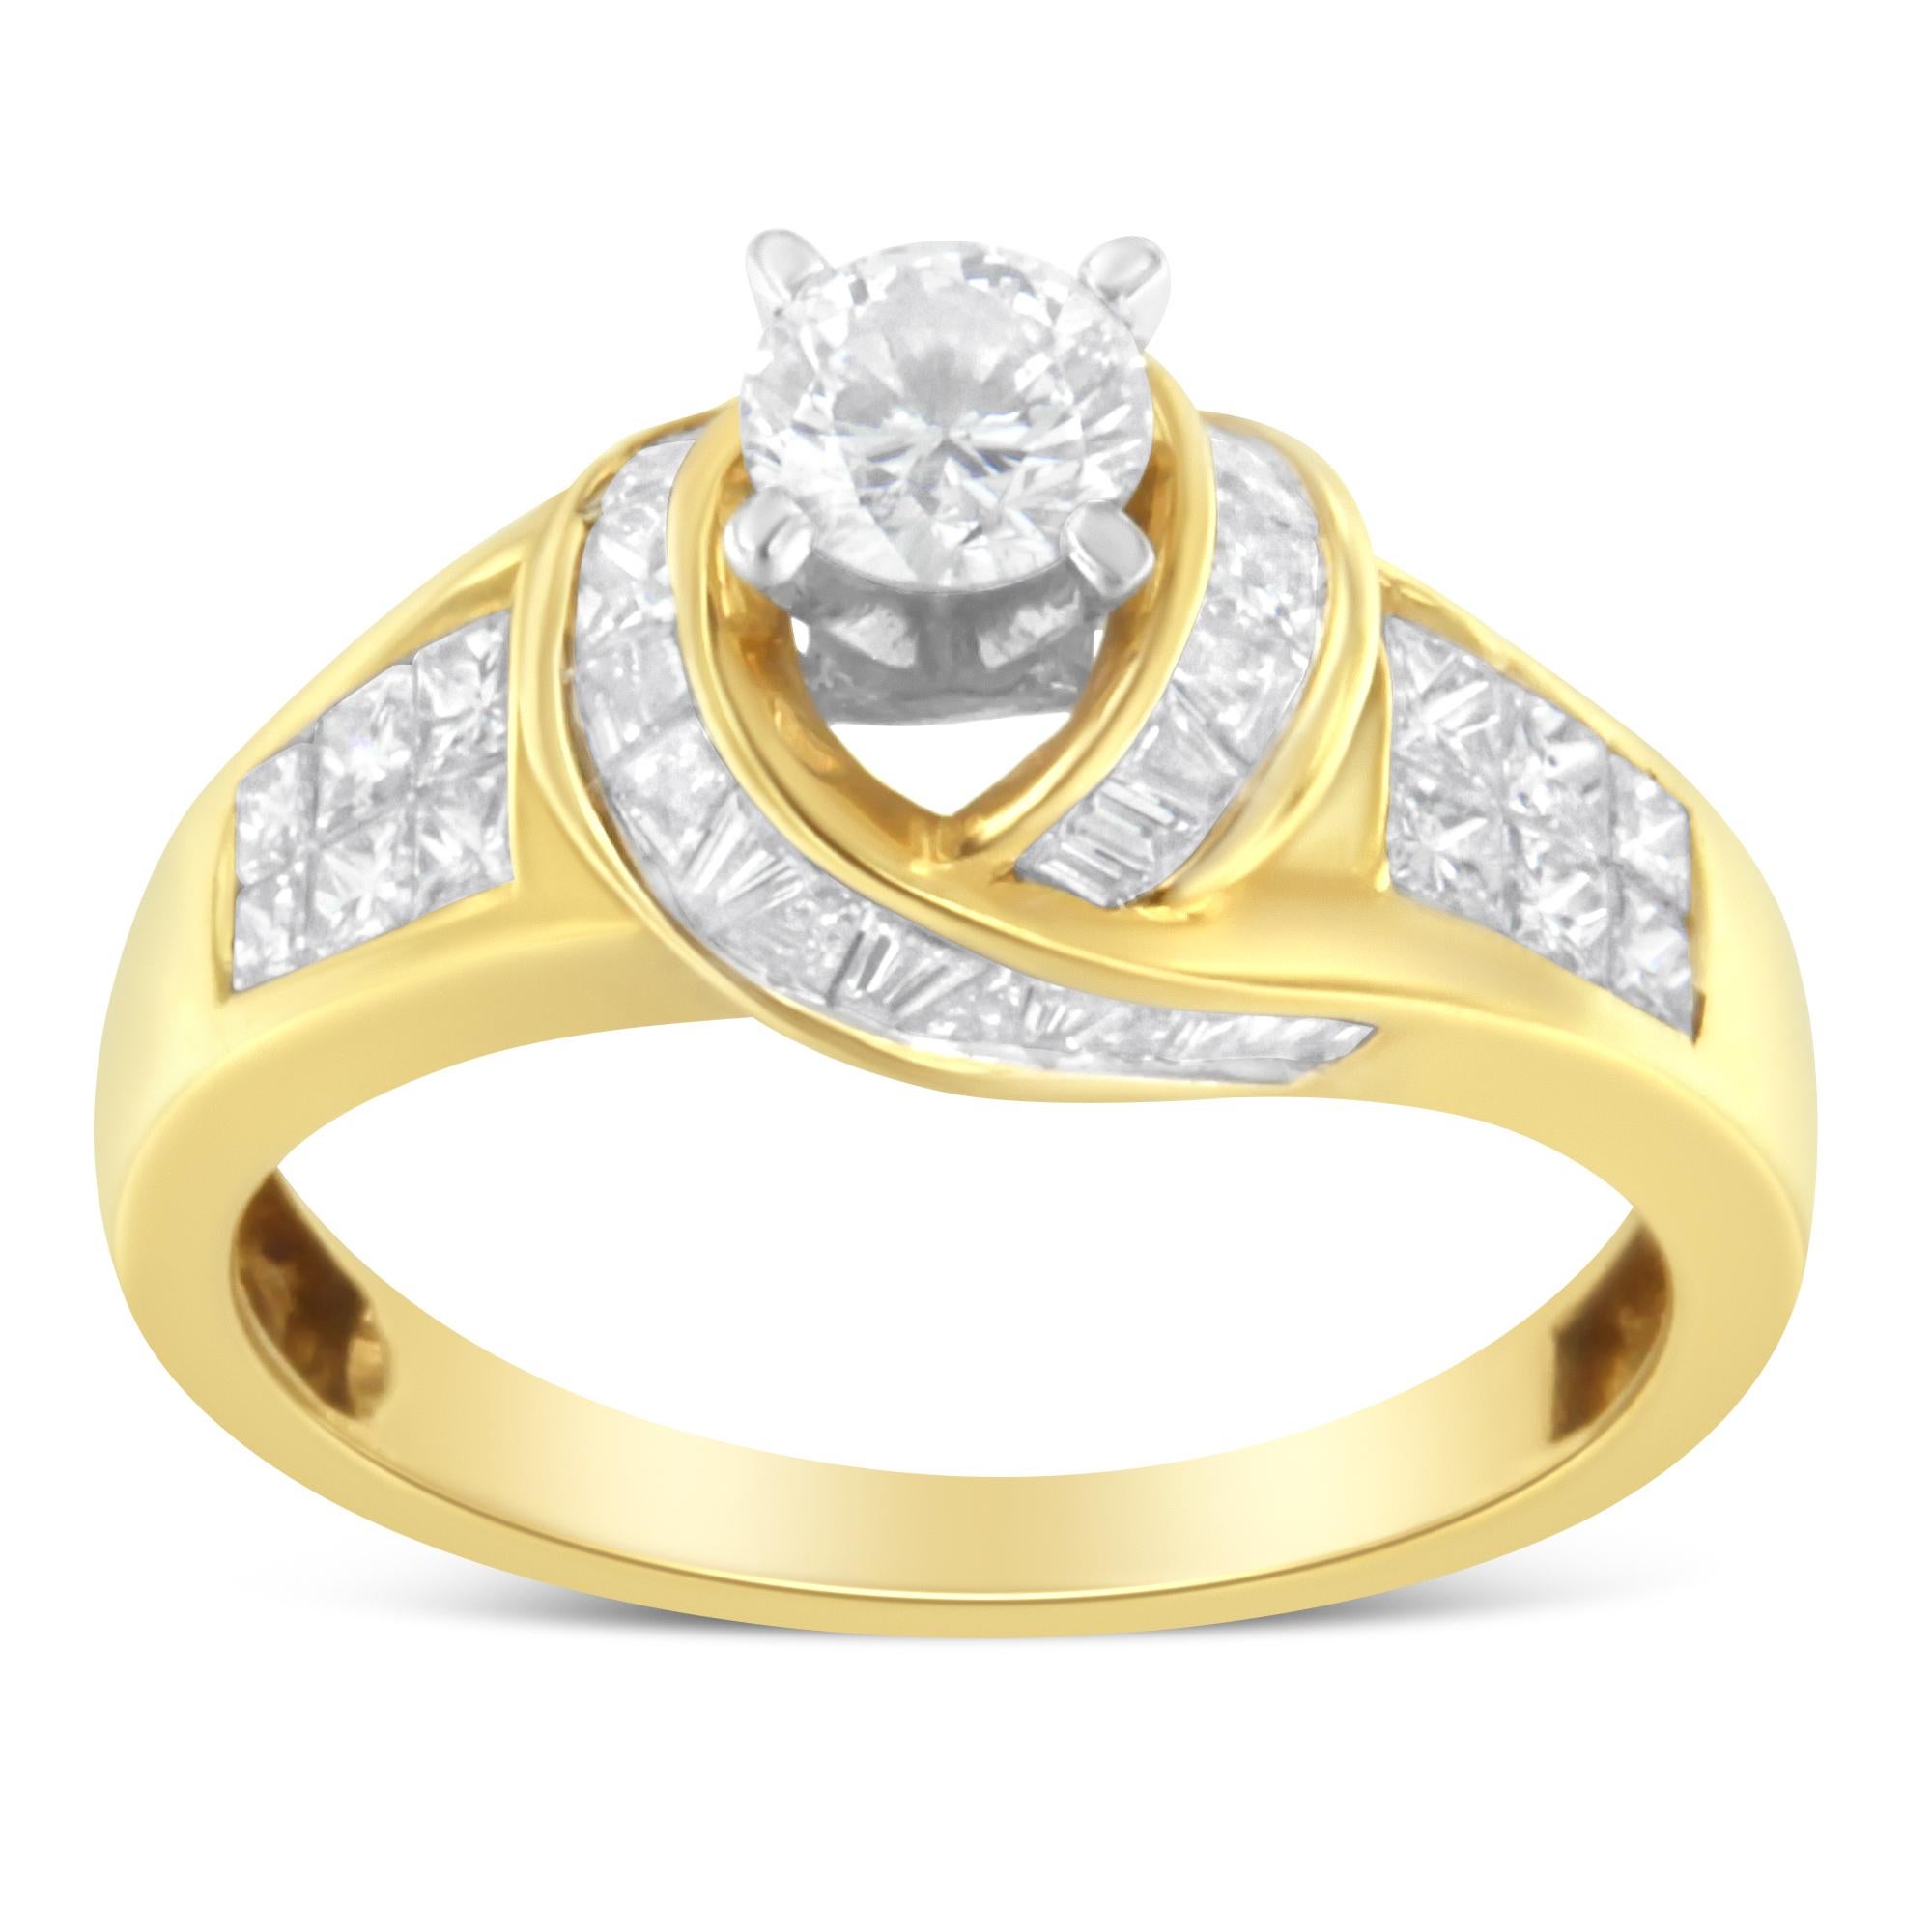 For Sale:  14K Two-Toned Gold 1 1/8 Carat Diamond Cocktail Ring 3